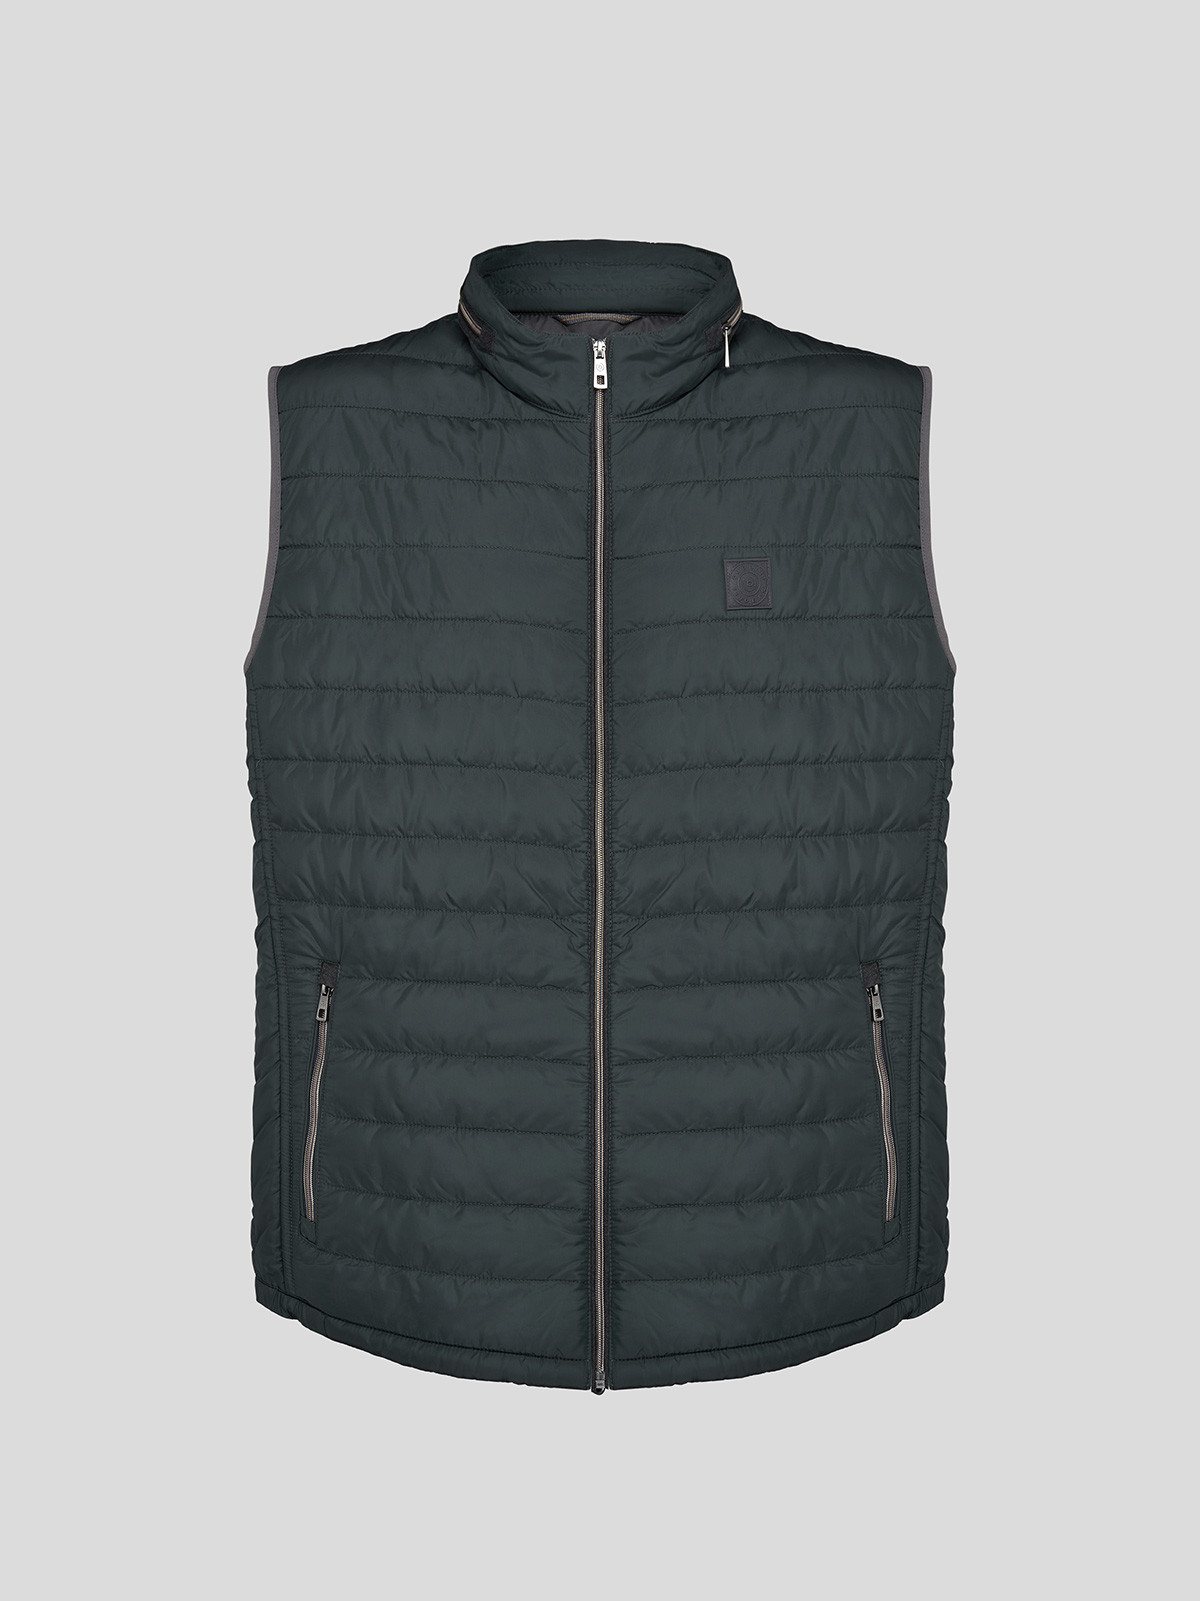 gilet homme grande taille 5xl